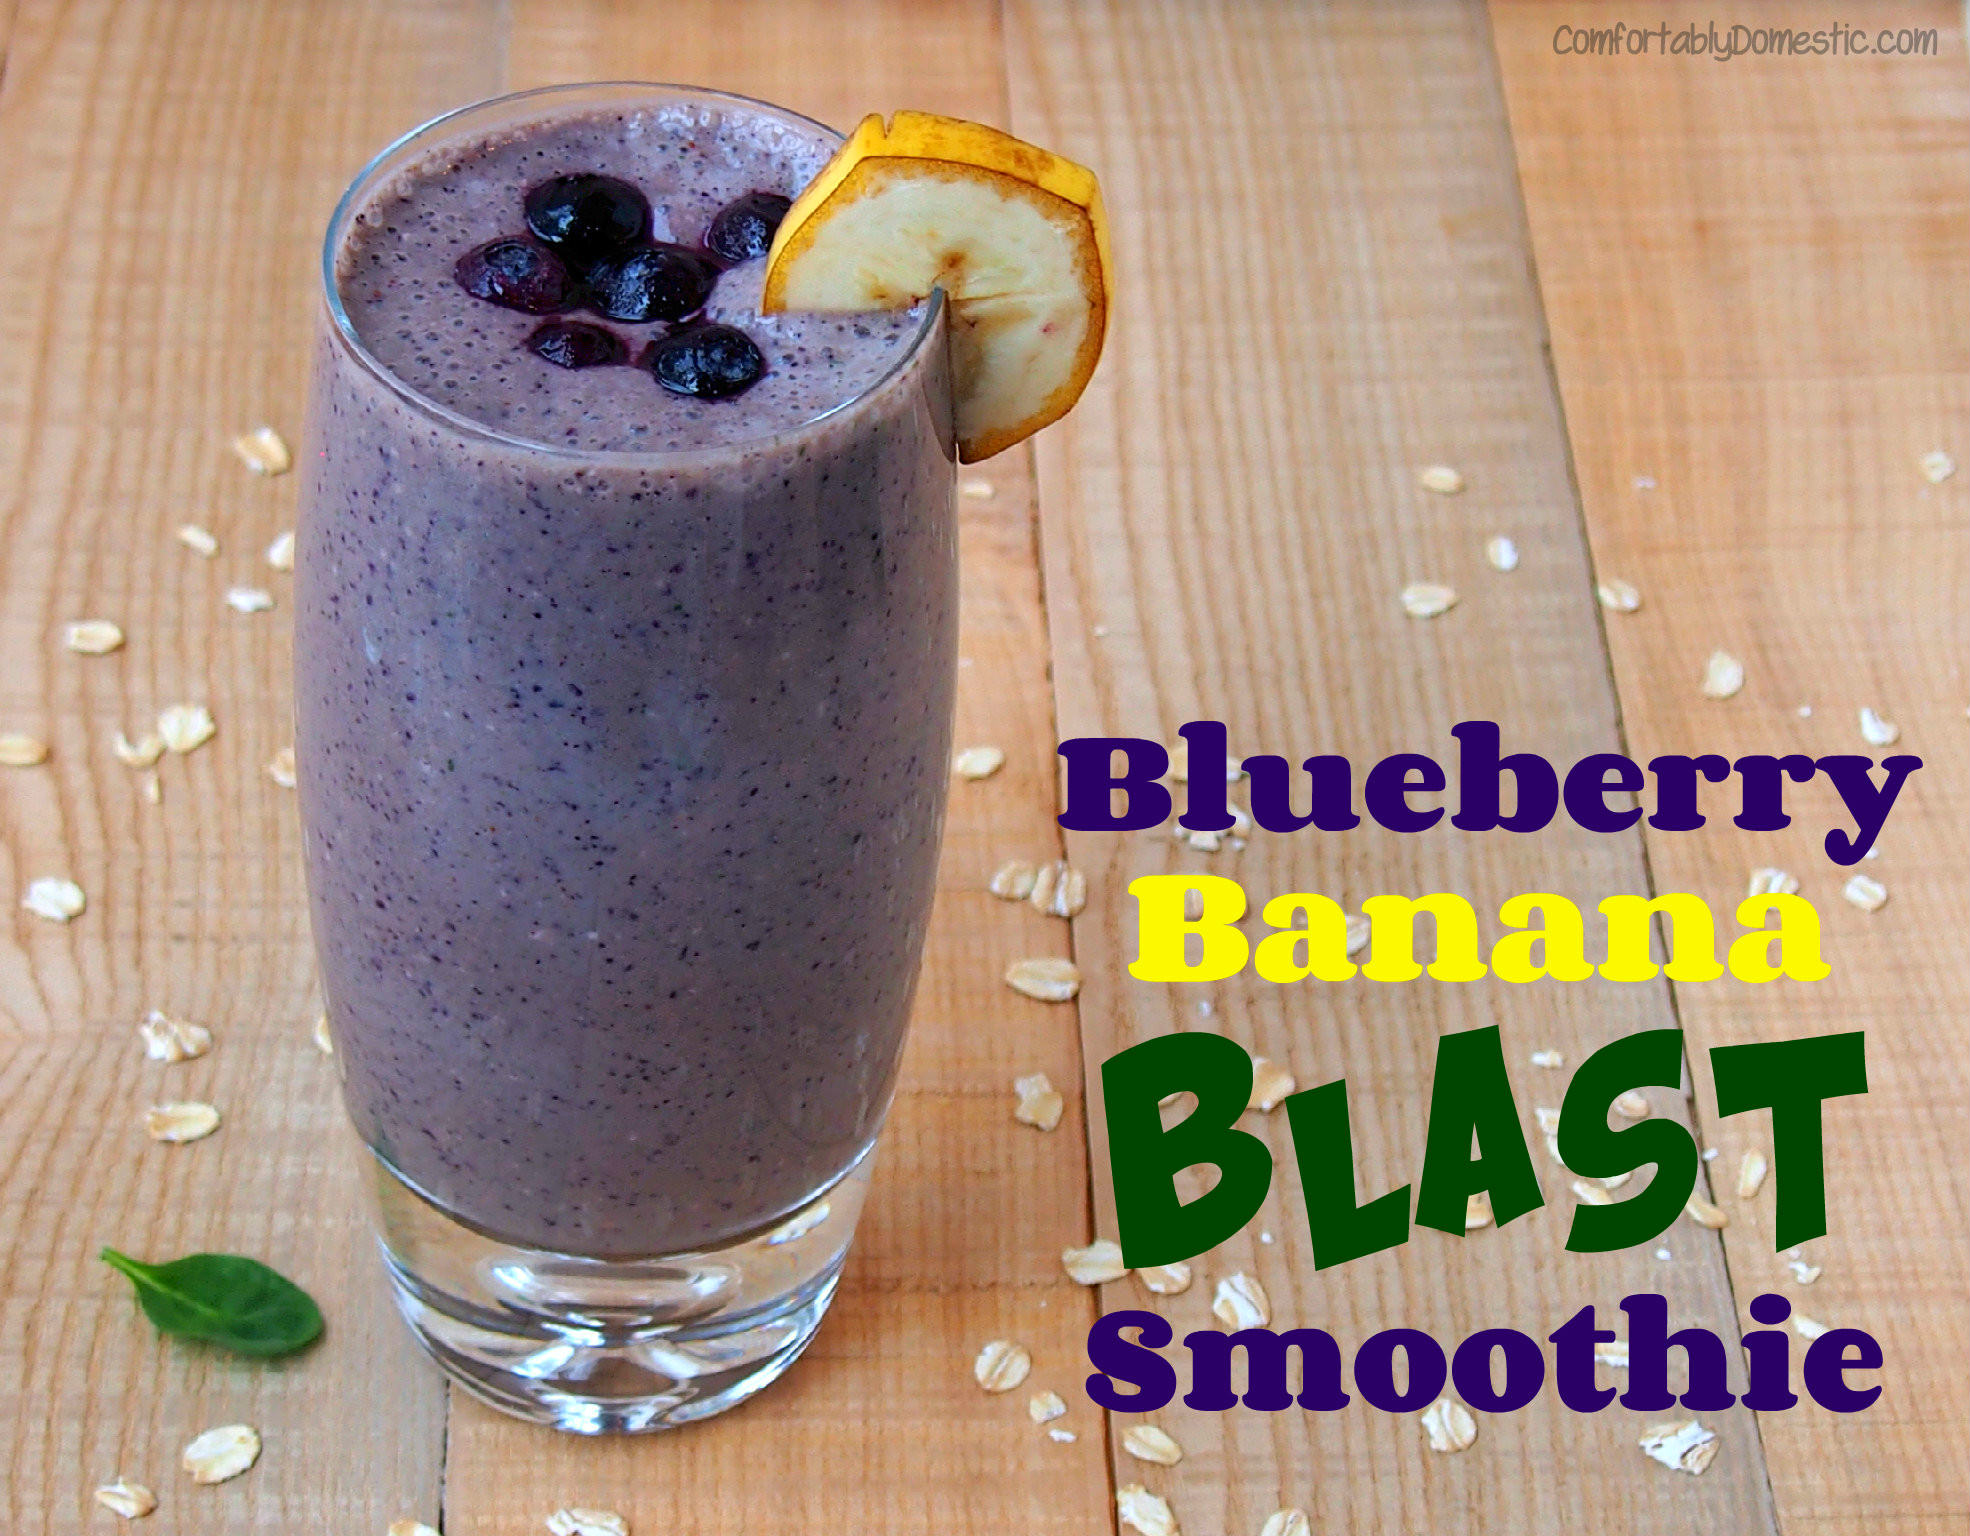 Blueberry banana smoothies make for a nutritious breakfast, ready in less than five minutes! Blending fruits, greens, and whole grains with vitamin rich milk and vanilla yogurt for a healthy smoothie that the whole family will love. | ComfortablyDomestic.com